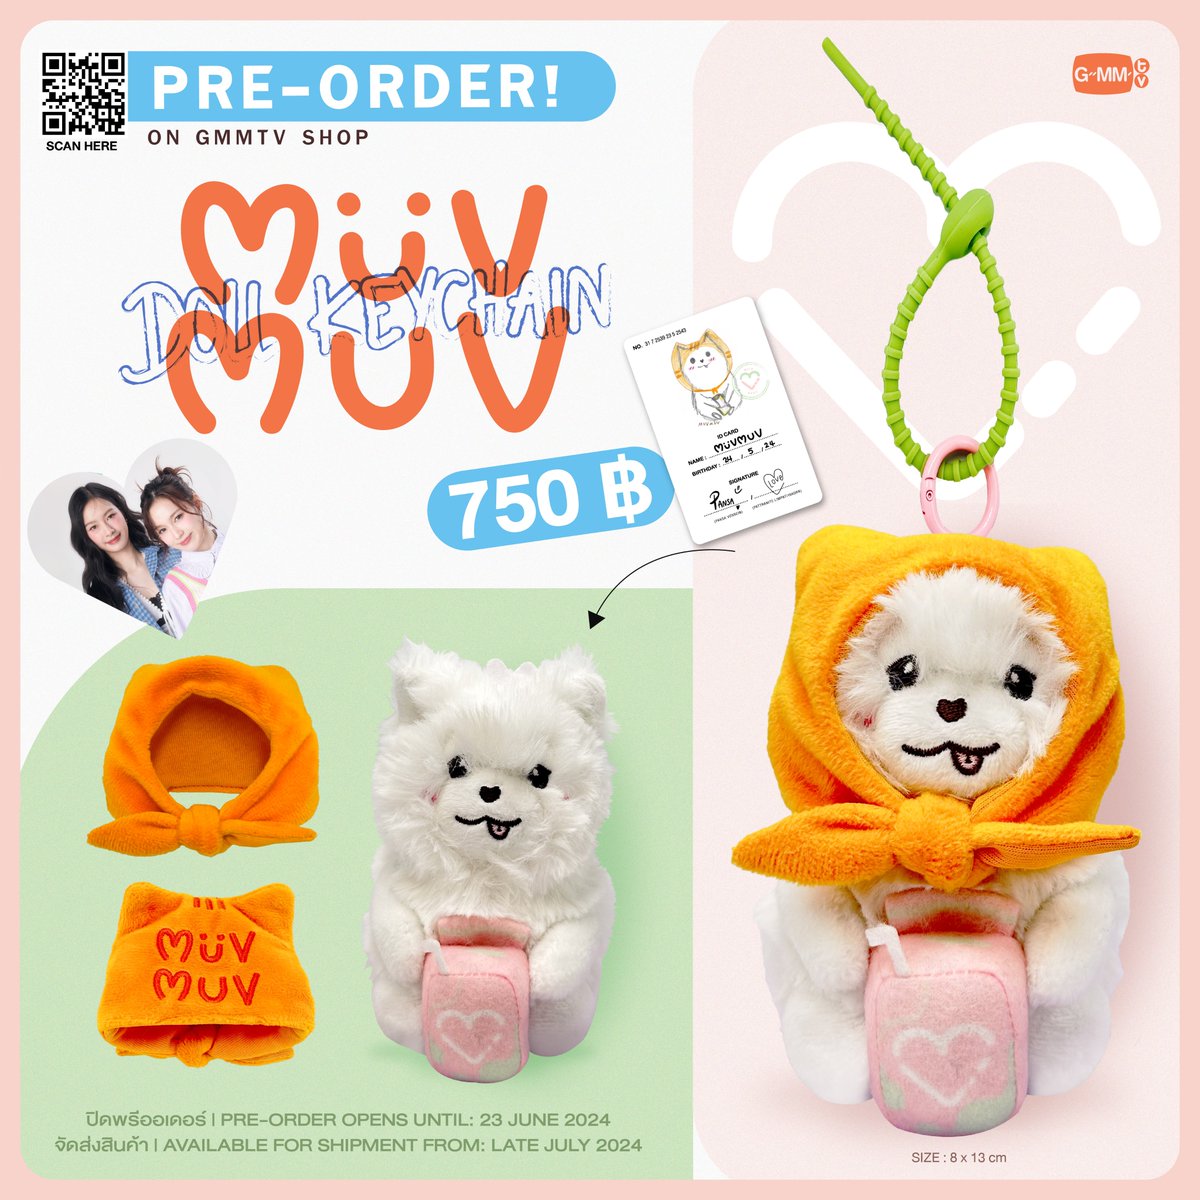 PRE-ORDER NOW! MUVMUV DOLL KEYCHAIN ON GMMTV SHOP gmm-tv.com/shop/muv-muv-d… Pre-order opens now until June 23, 2024. All purchase orders will be shipped sequentially starting from early July 2024. #23point5FinalEP #มิ้ลค์เลิฟ #MilkLove #GMMTV